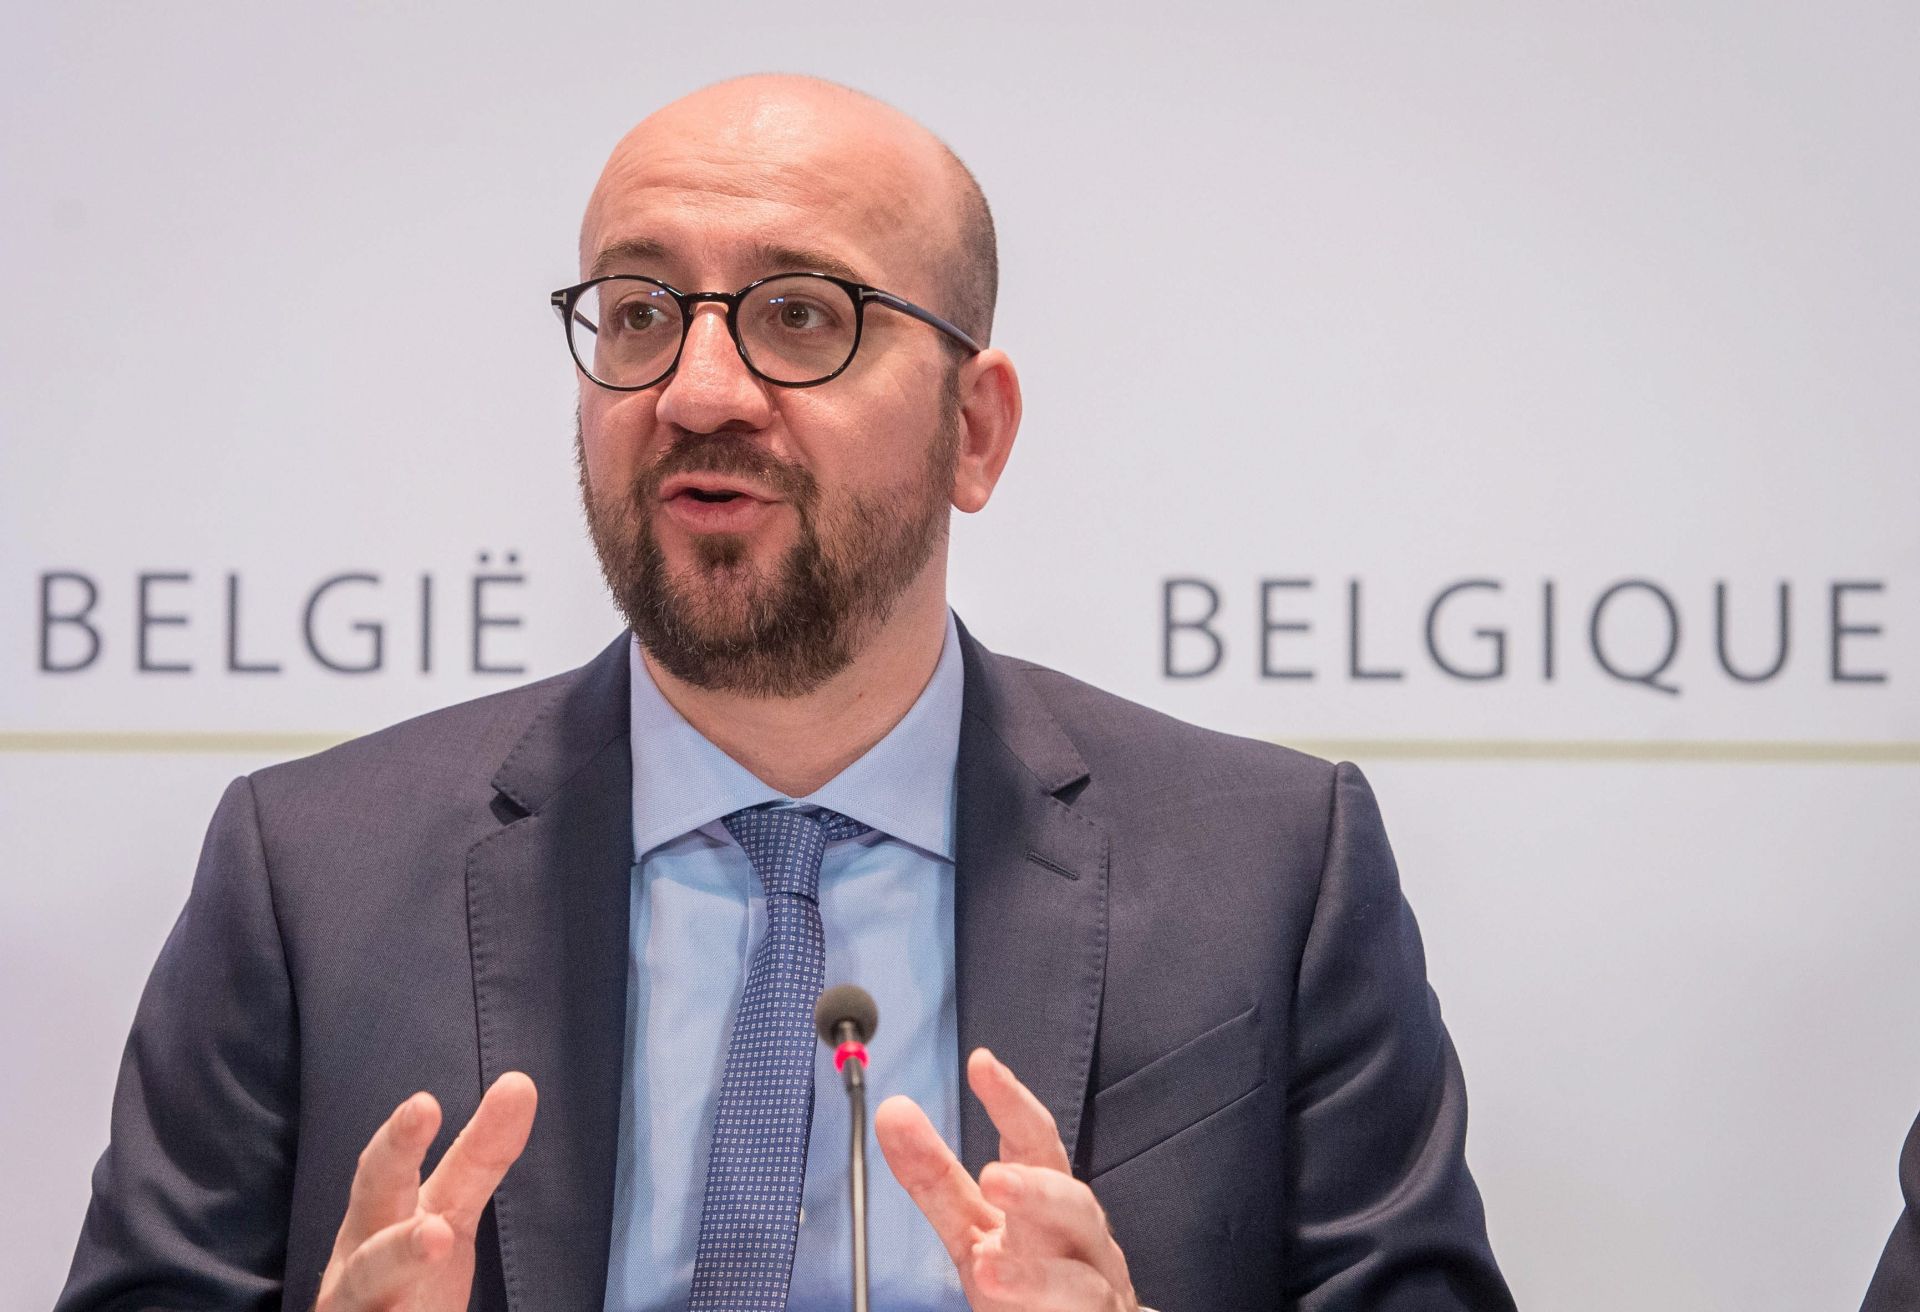 epa05250798 Belgian Prime Minister Charles Michel gives a press conference in Brussels, Belgium, 09 April 2016, after the government sealed Saturday shortly after midnight on budgetary control and a number of further structural reforms.  EPA/STEPHANIE LECOCQ